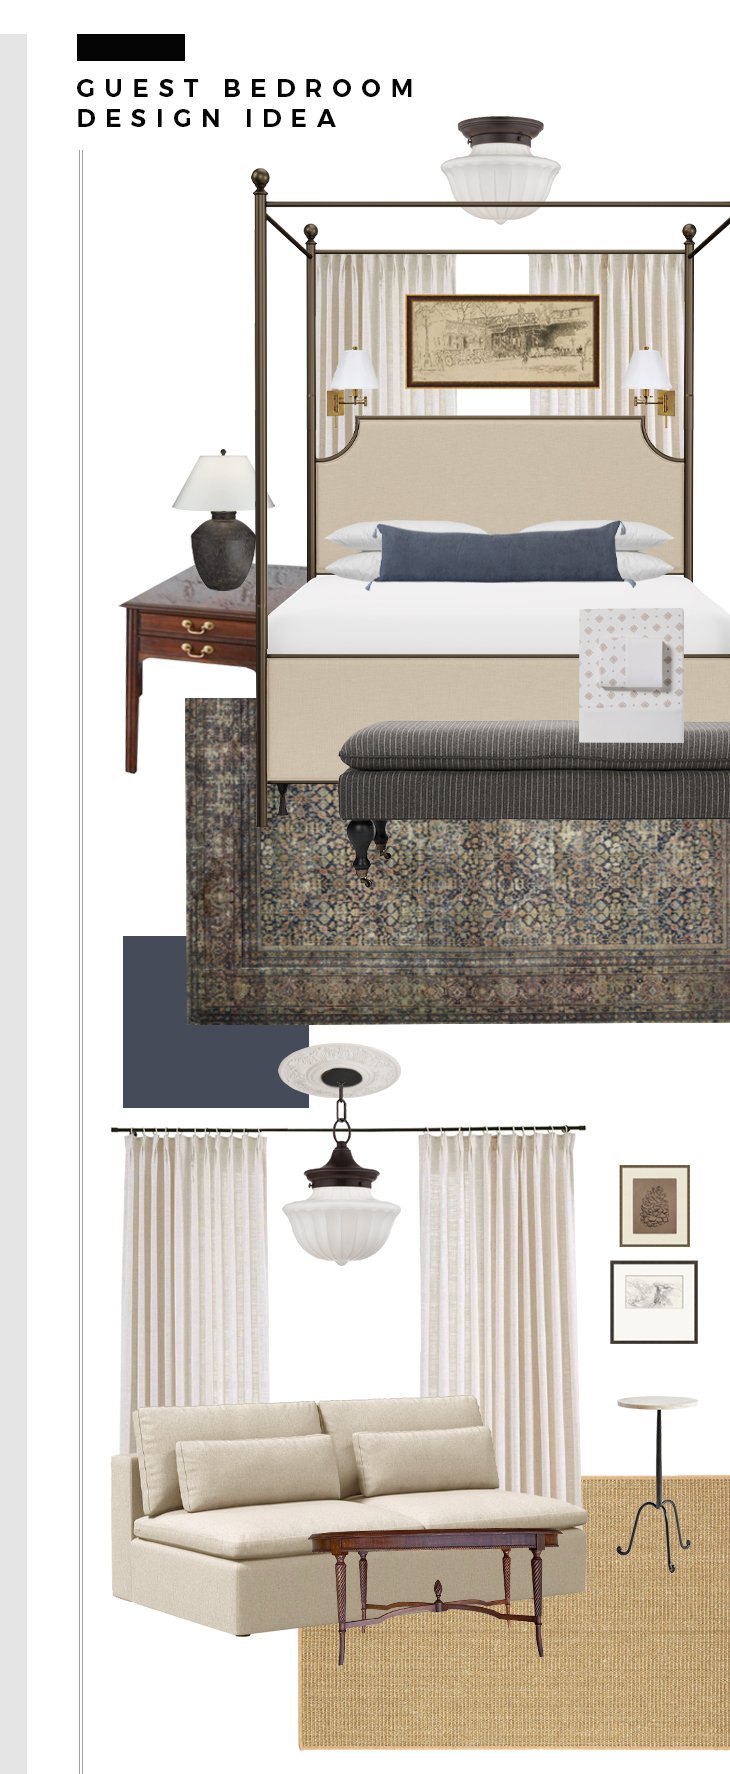 Large Guest Bedroom Renovation Plan - roomfortuesday.com